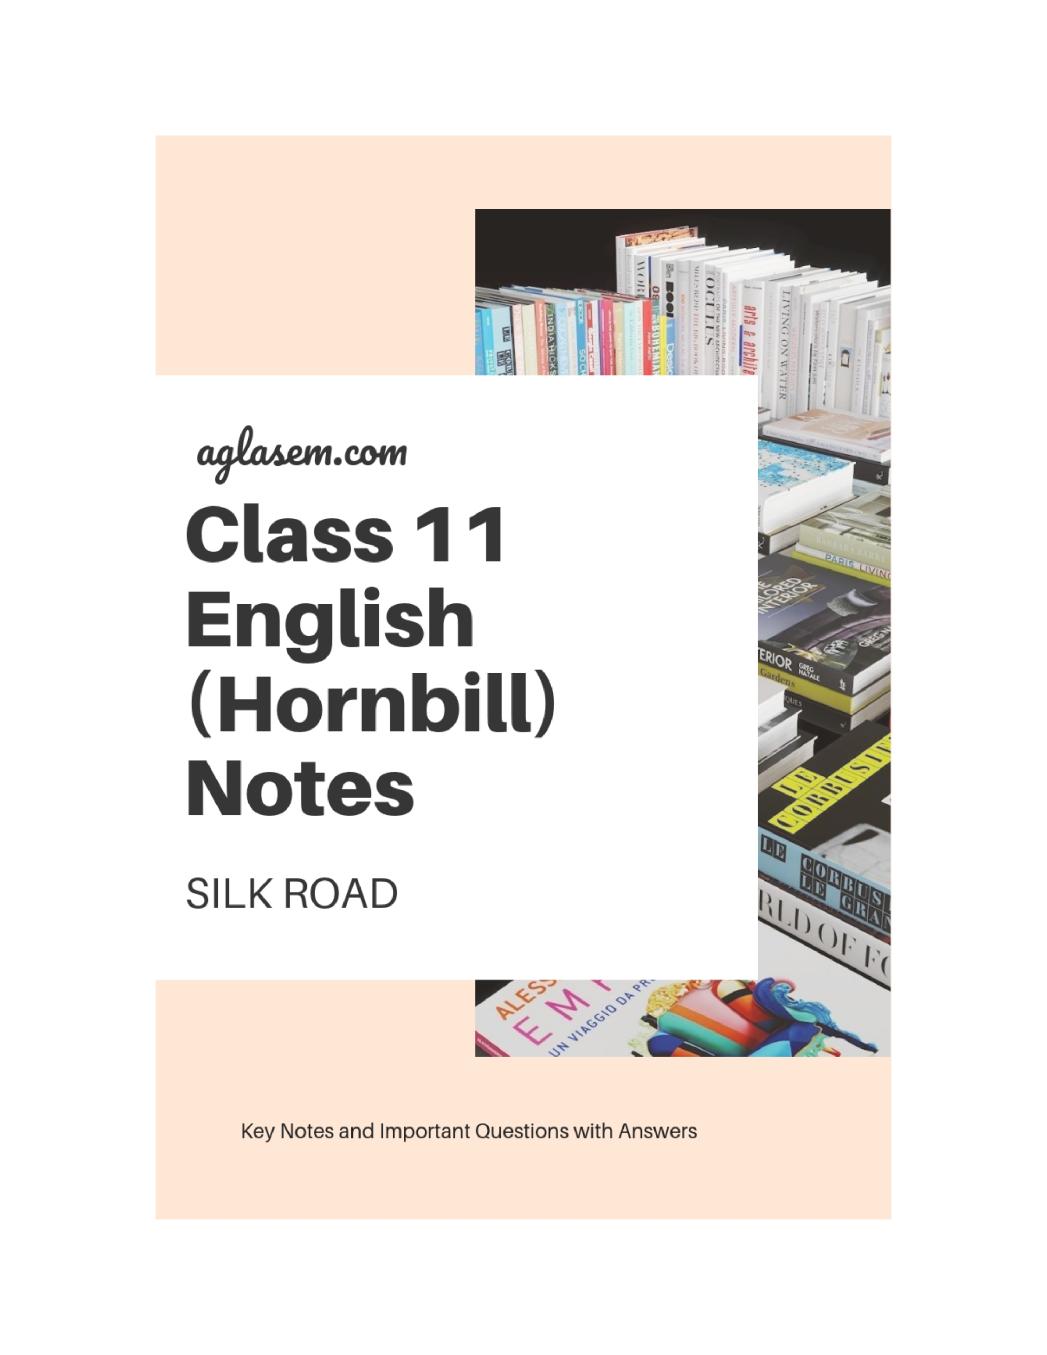 Class 11 English Hornbill Notes For Silk Road - Page 1